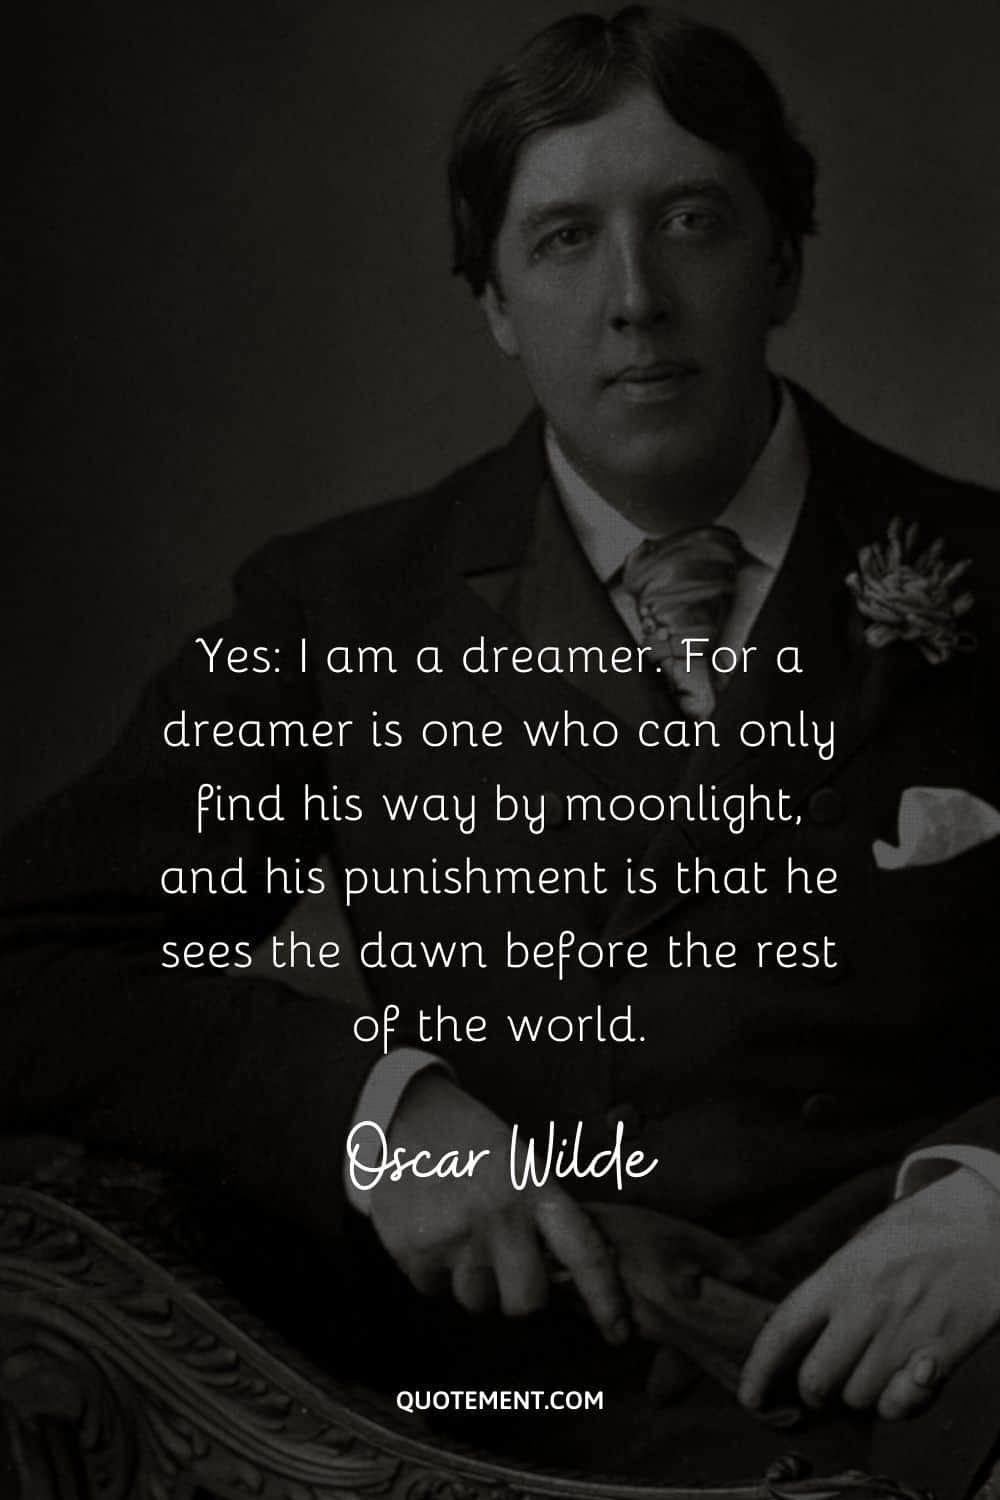 “Yes I am a dreamer. For a dreamer is one who can only find his way by moonlight, and his punishment is that he sees the dawn before the rest of the world.” ― Oscar Wilde